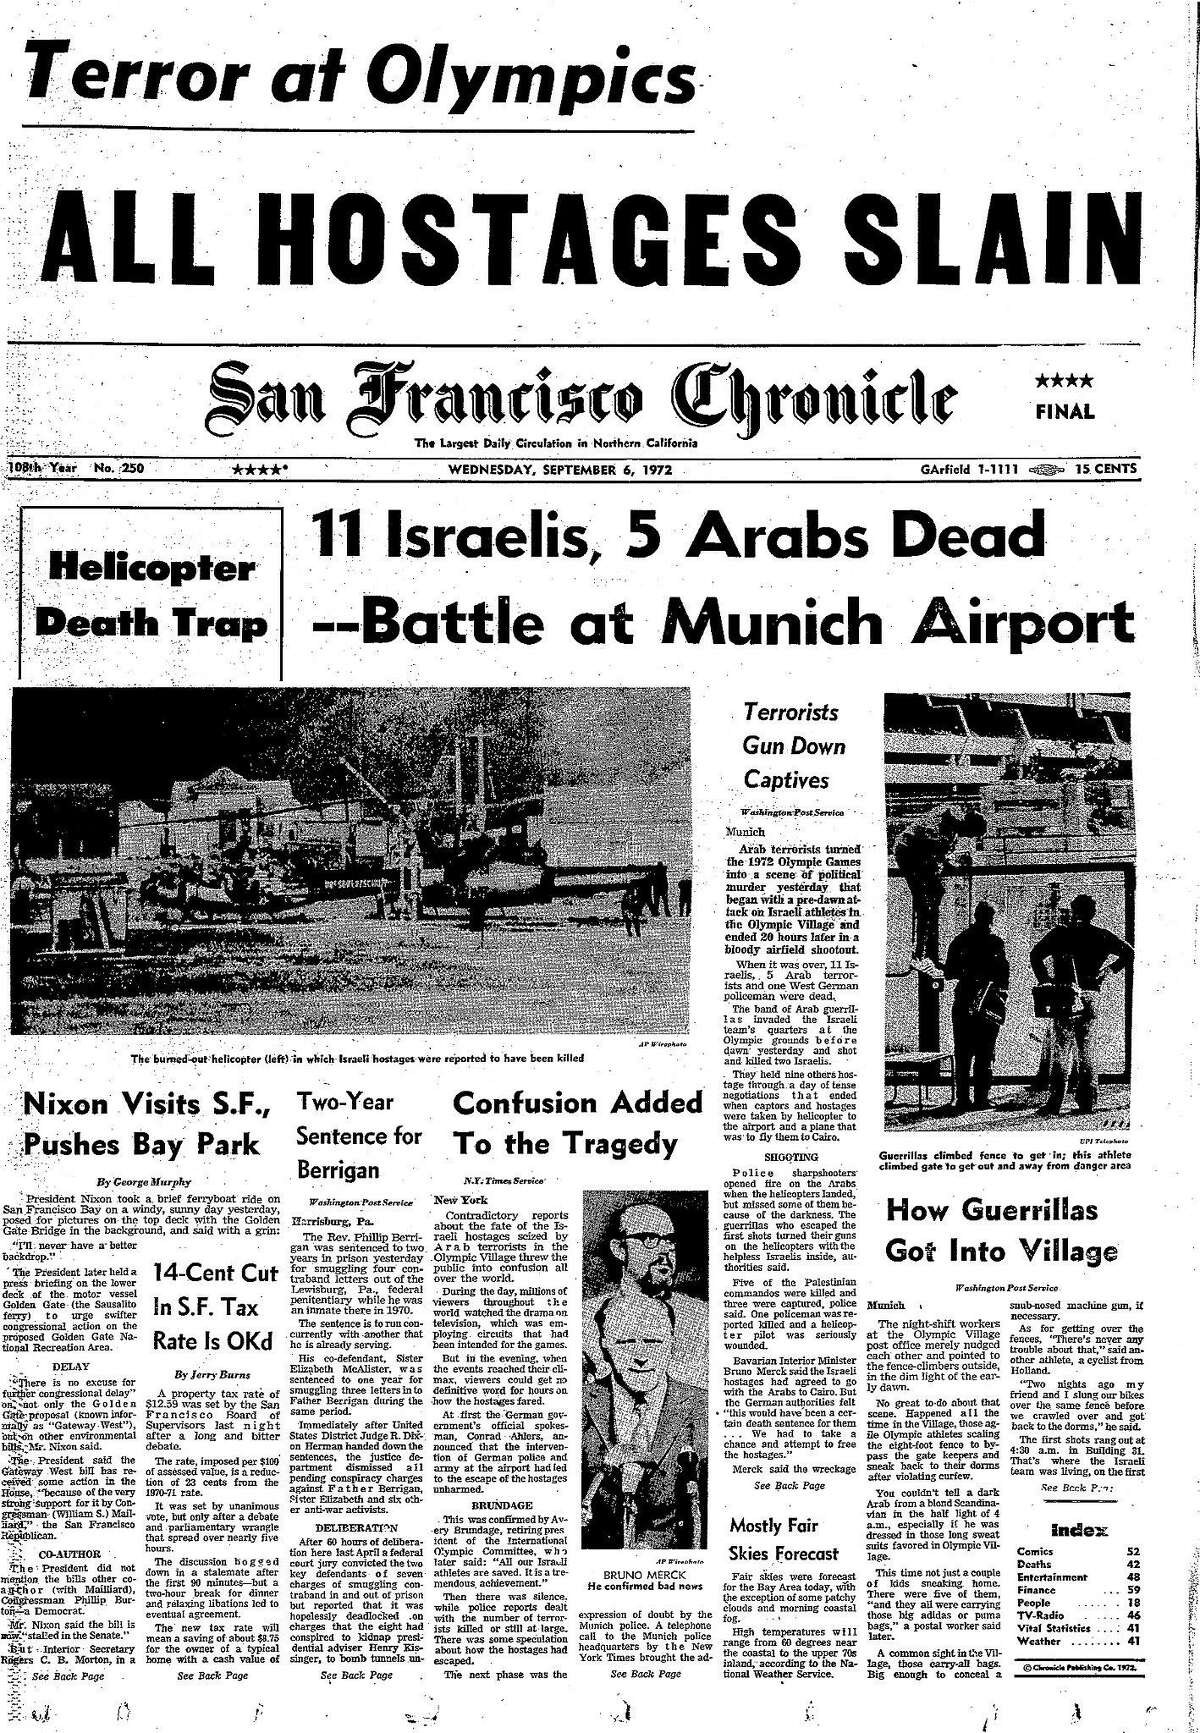 Historic Chronicle Front Page September 06, 1972 Olympic athletes are held hostage then killed at Munich Olympics